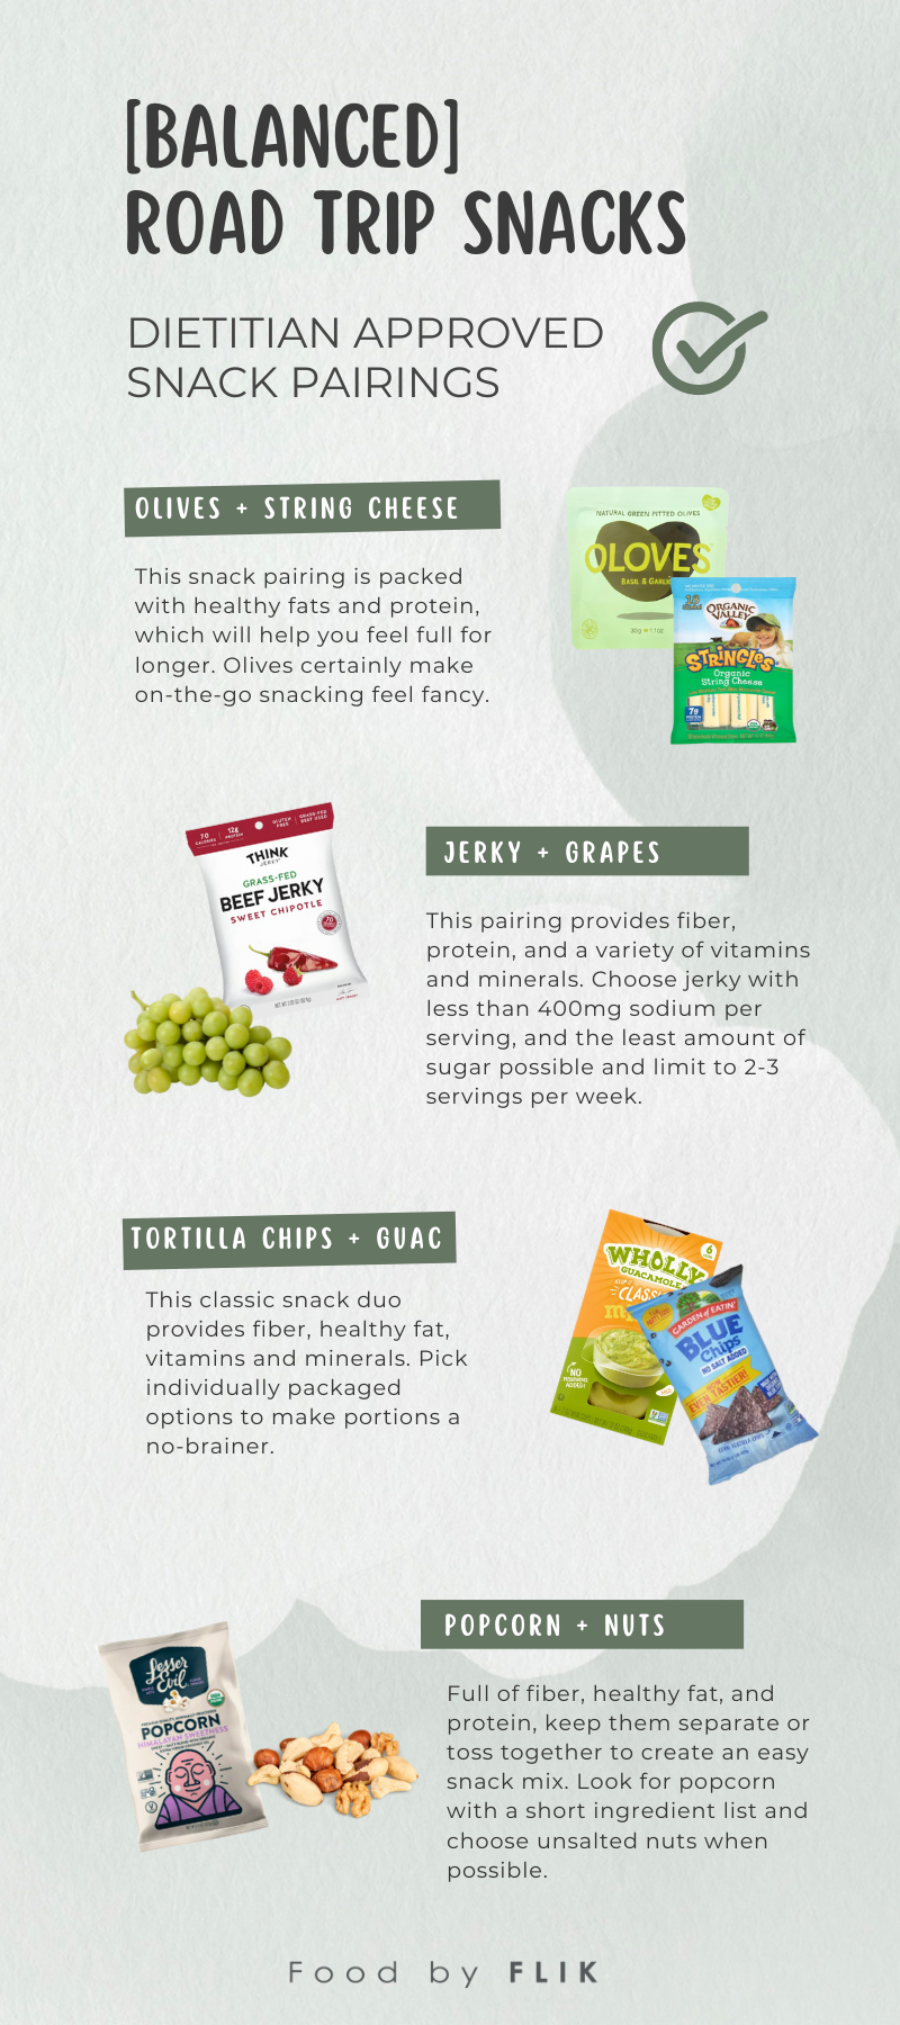 Tips for Healthy Road Trip Snacks